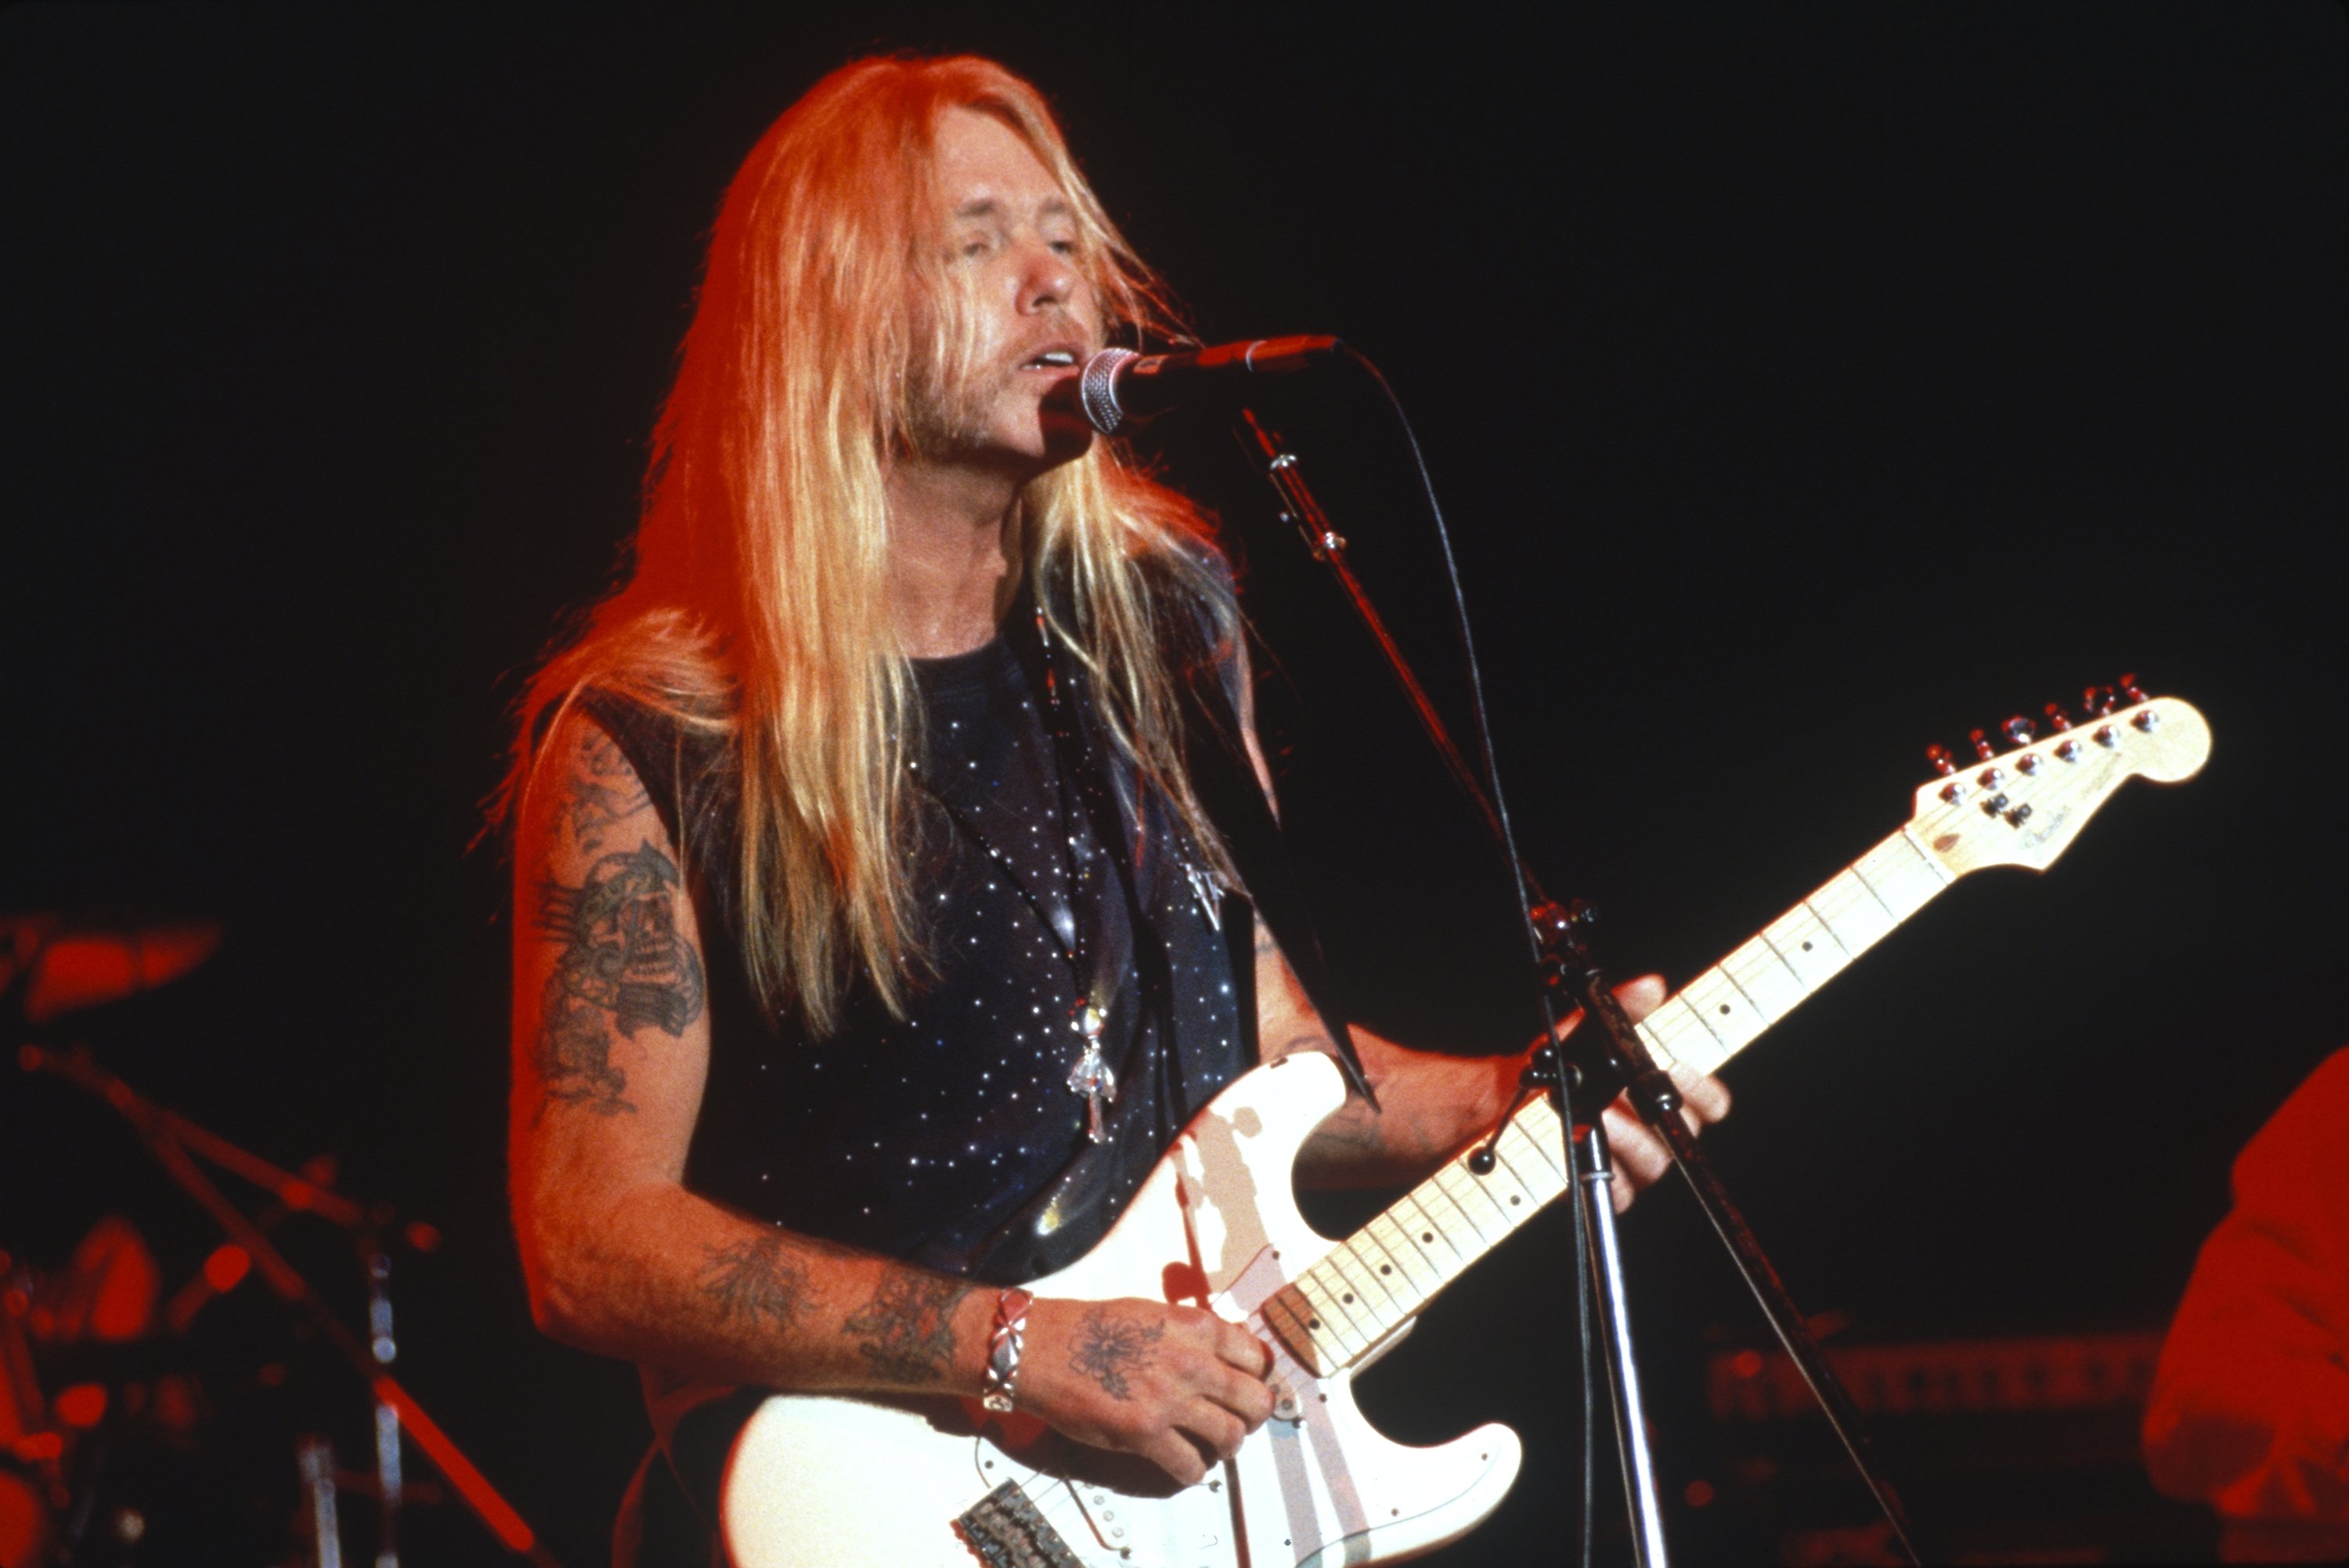 Gregg Allman performs during the South Bay Blues Awards at San Jose Civic Auditorium on November 7, 1993, in San Jose, California. | Source: Getty Images